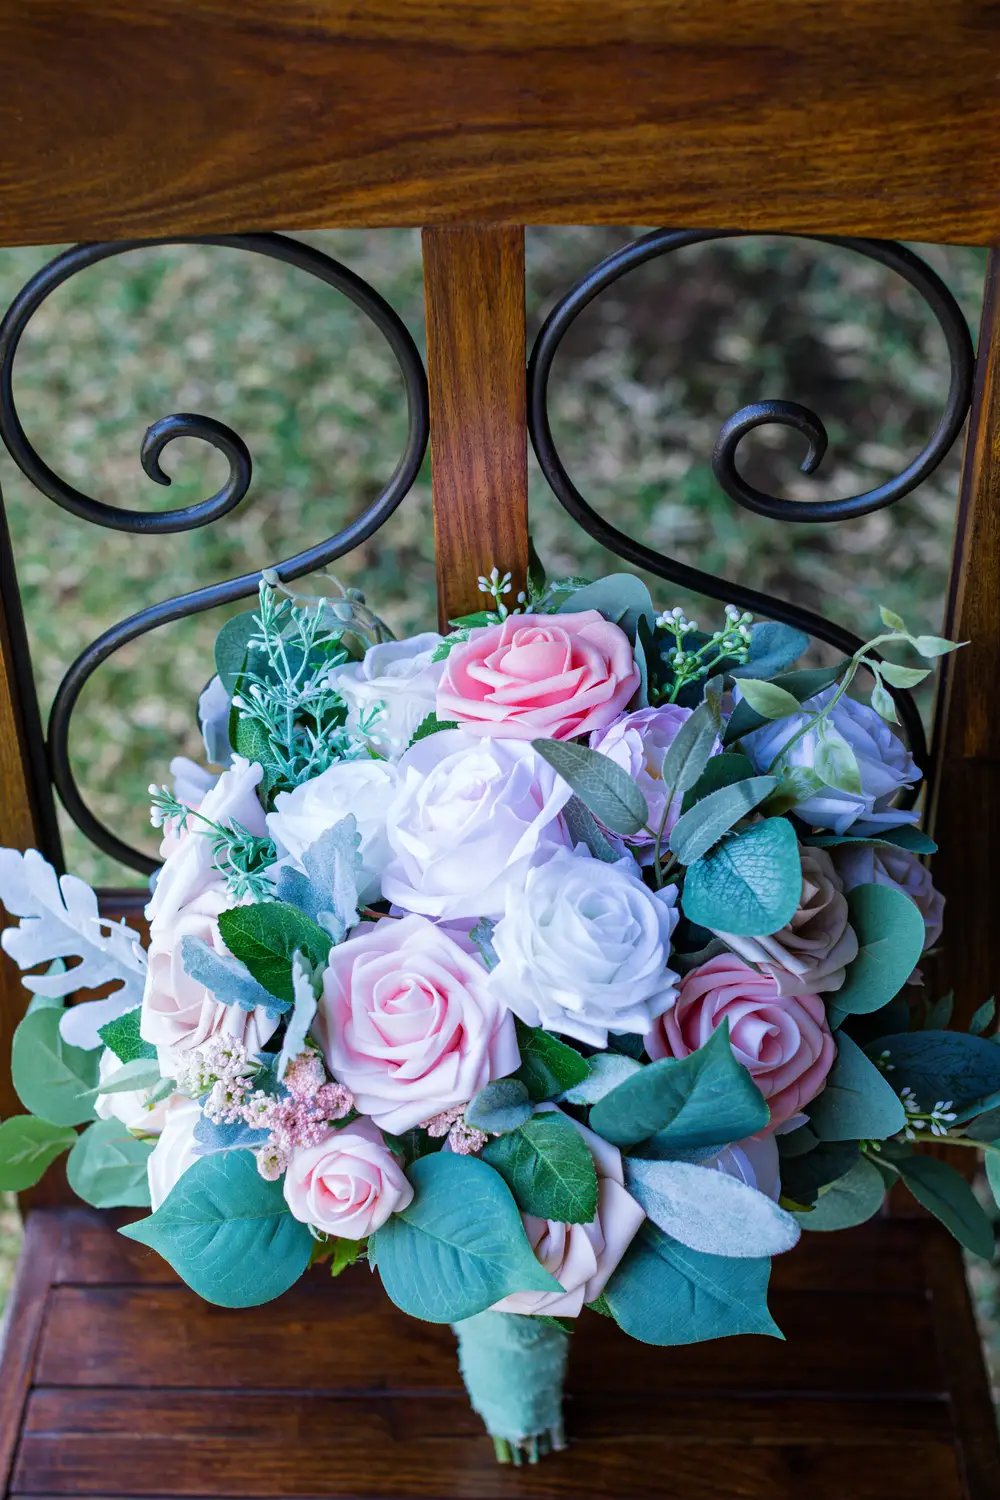 Bouquet of pink, green and white roses